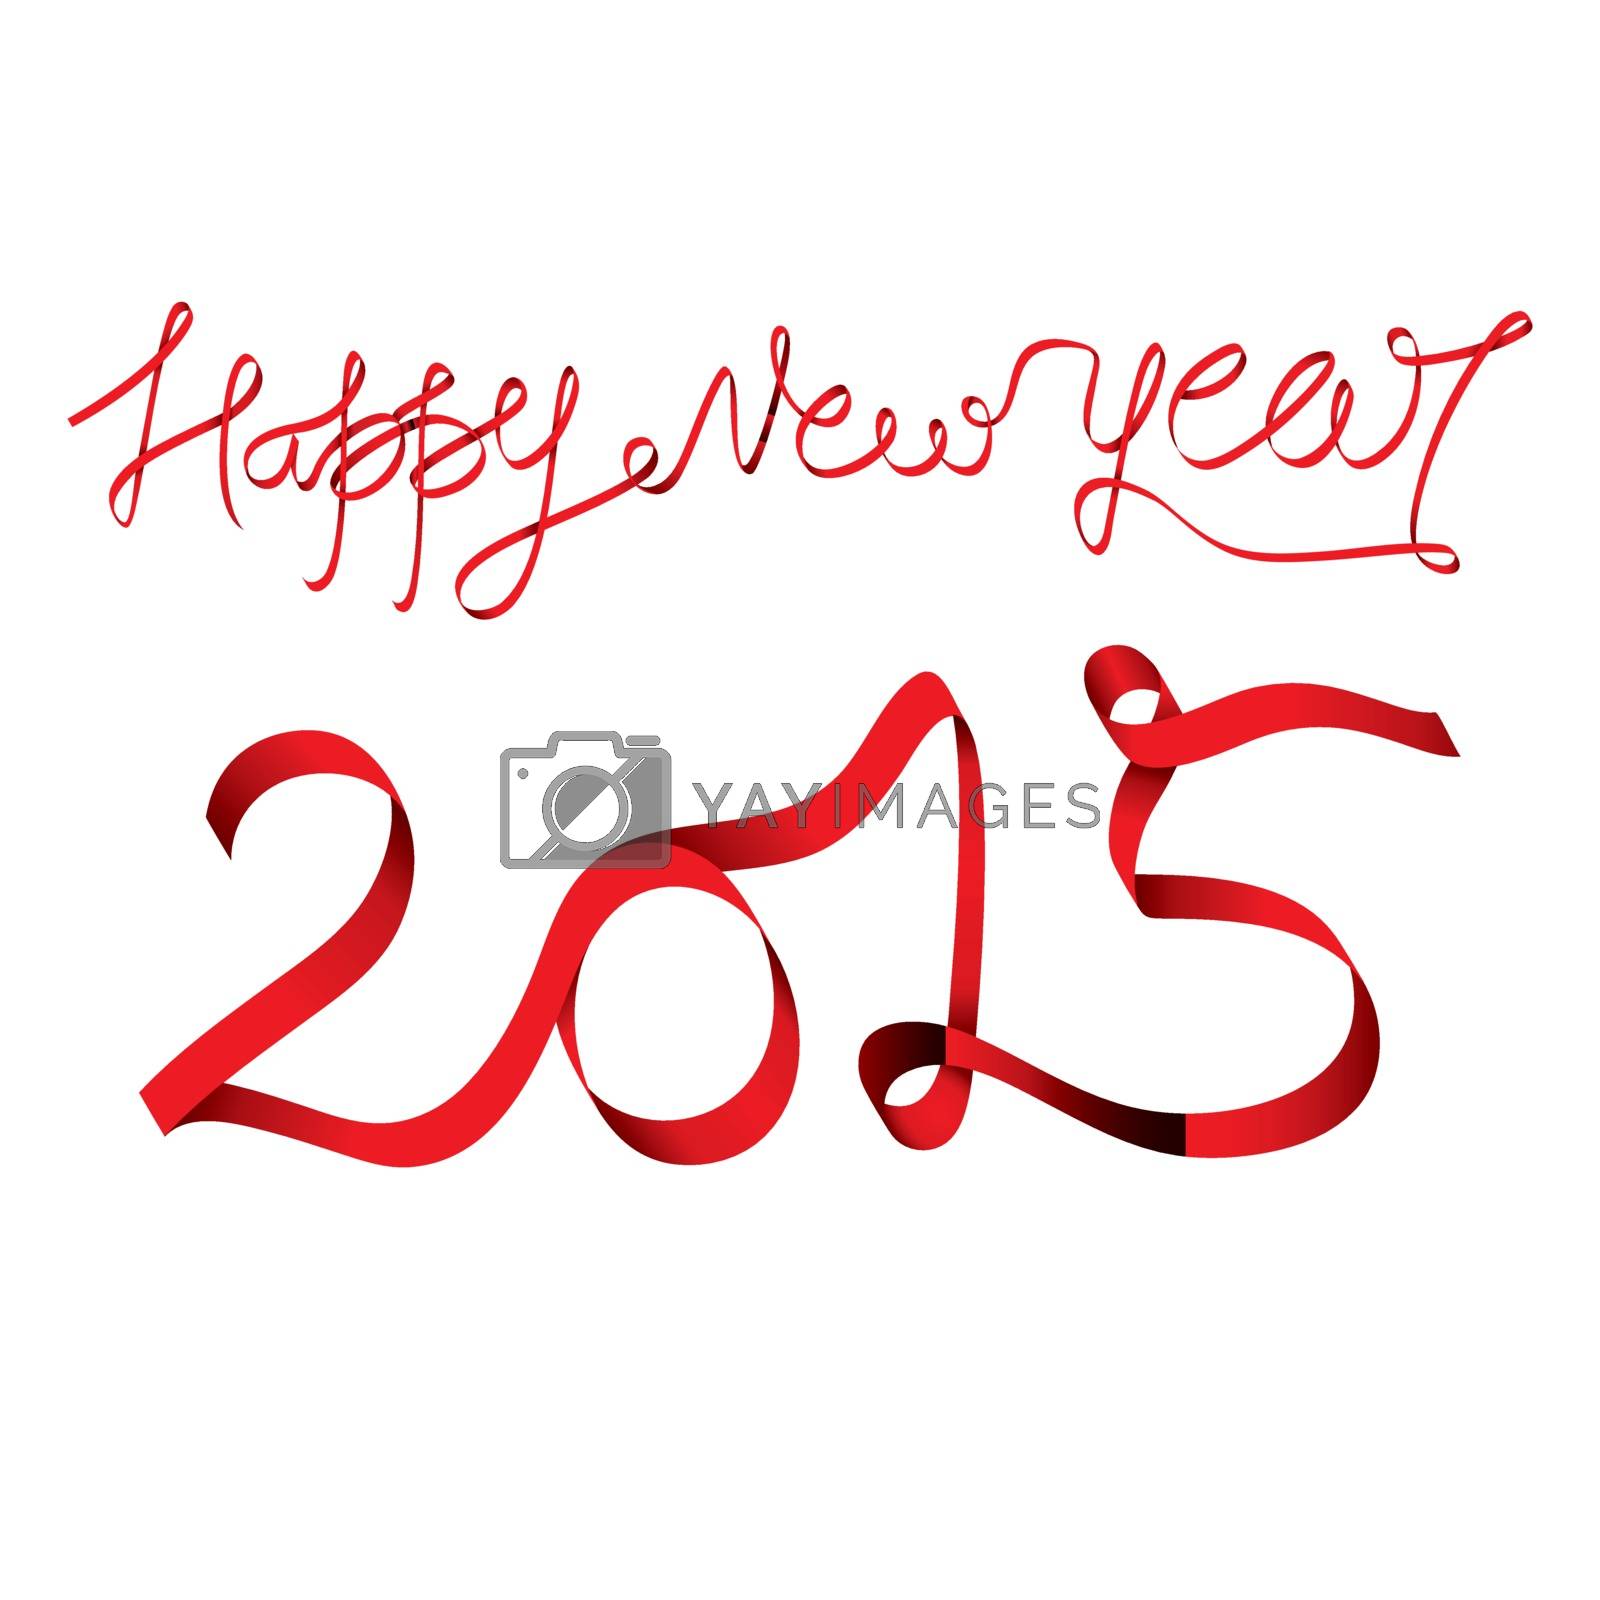 Royalty free image of creative happy new year 2015 greeting design with red ribbon  vector by vectoraart